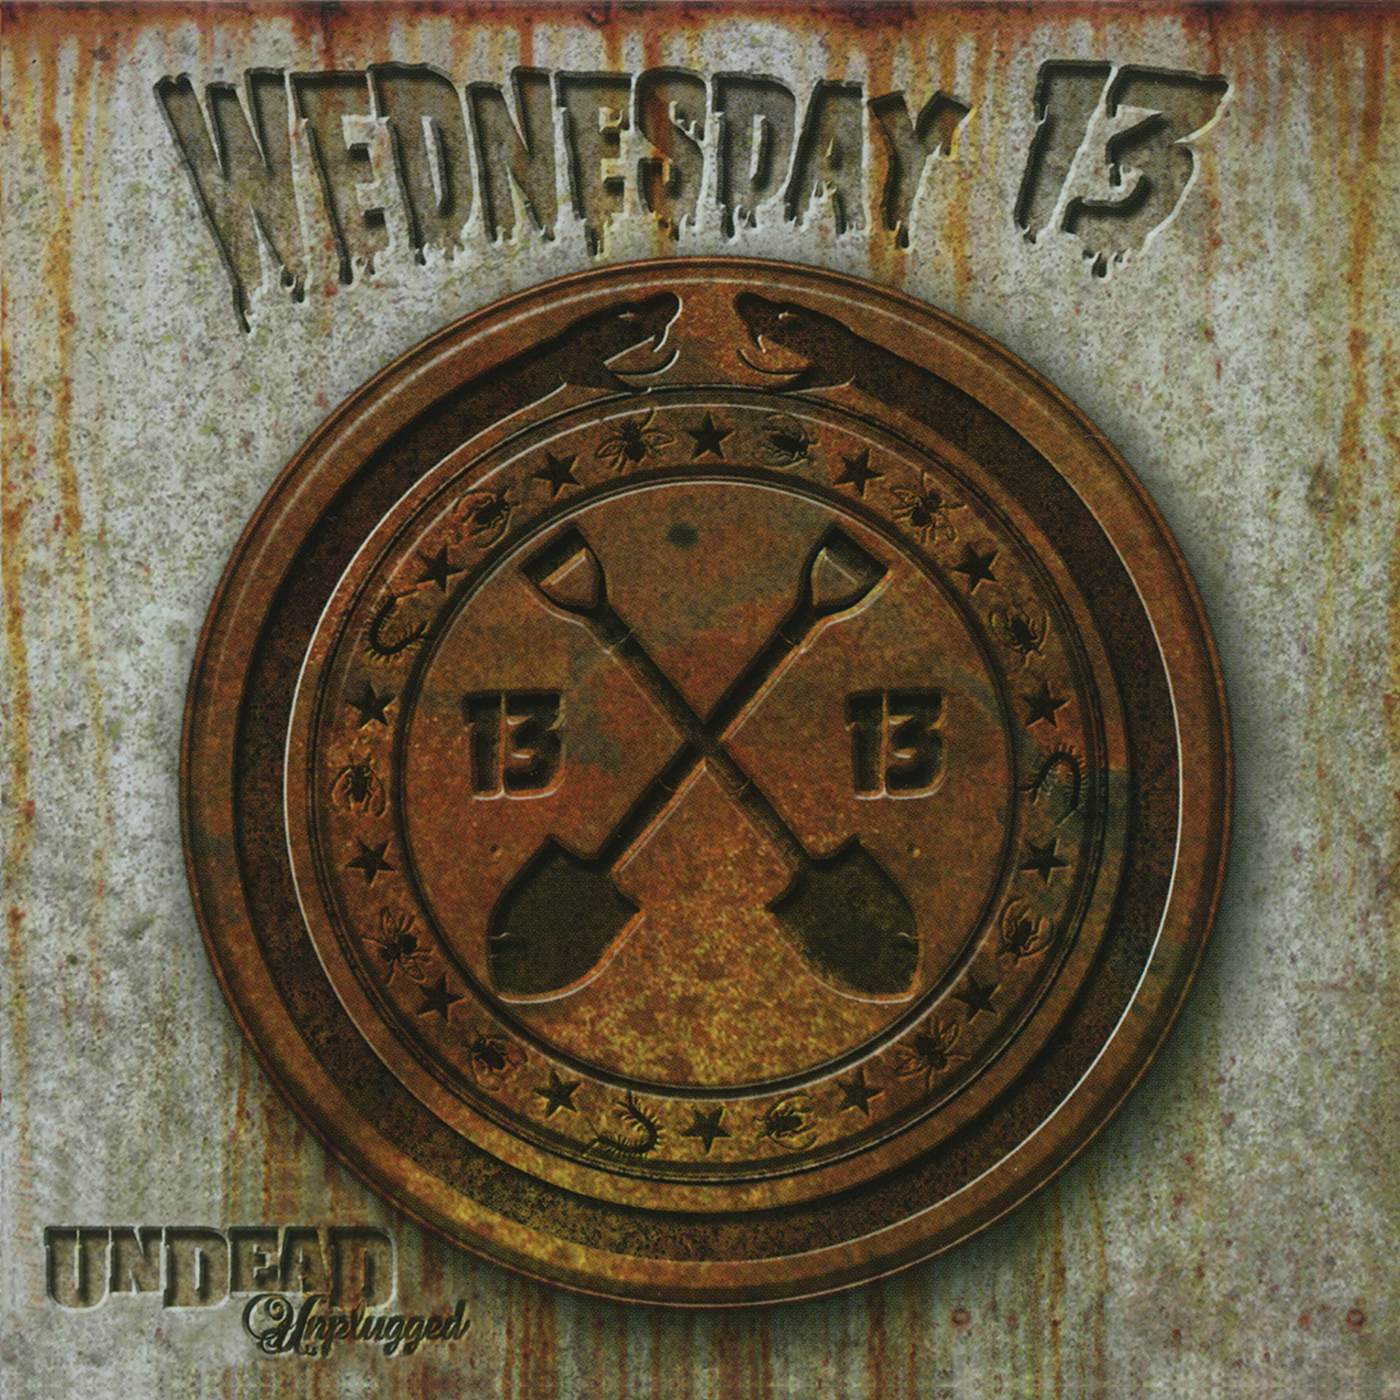 Wednesday 13 UNDEAD UNPLUGGED CD